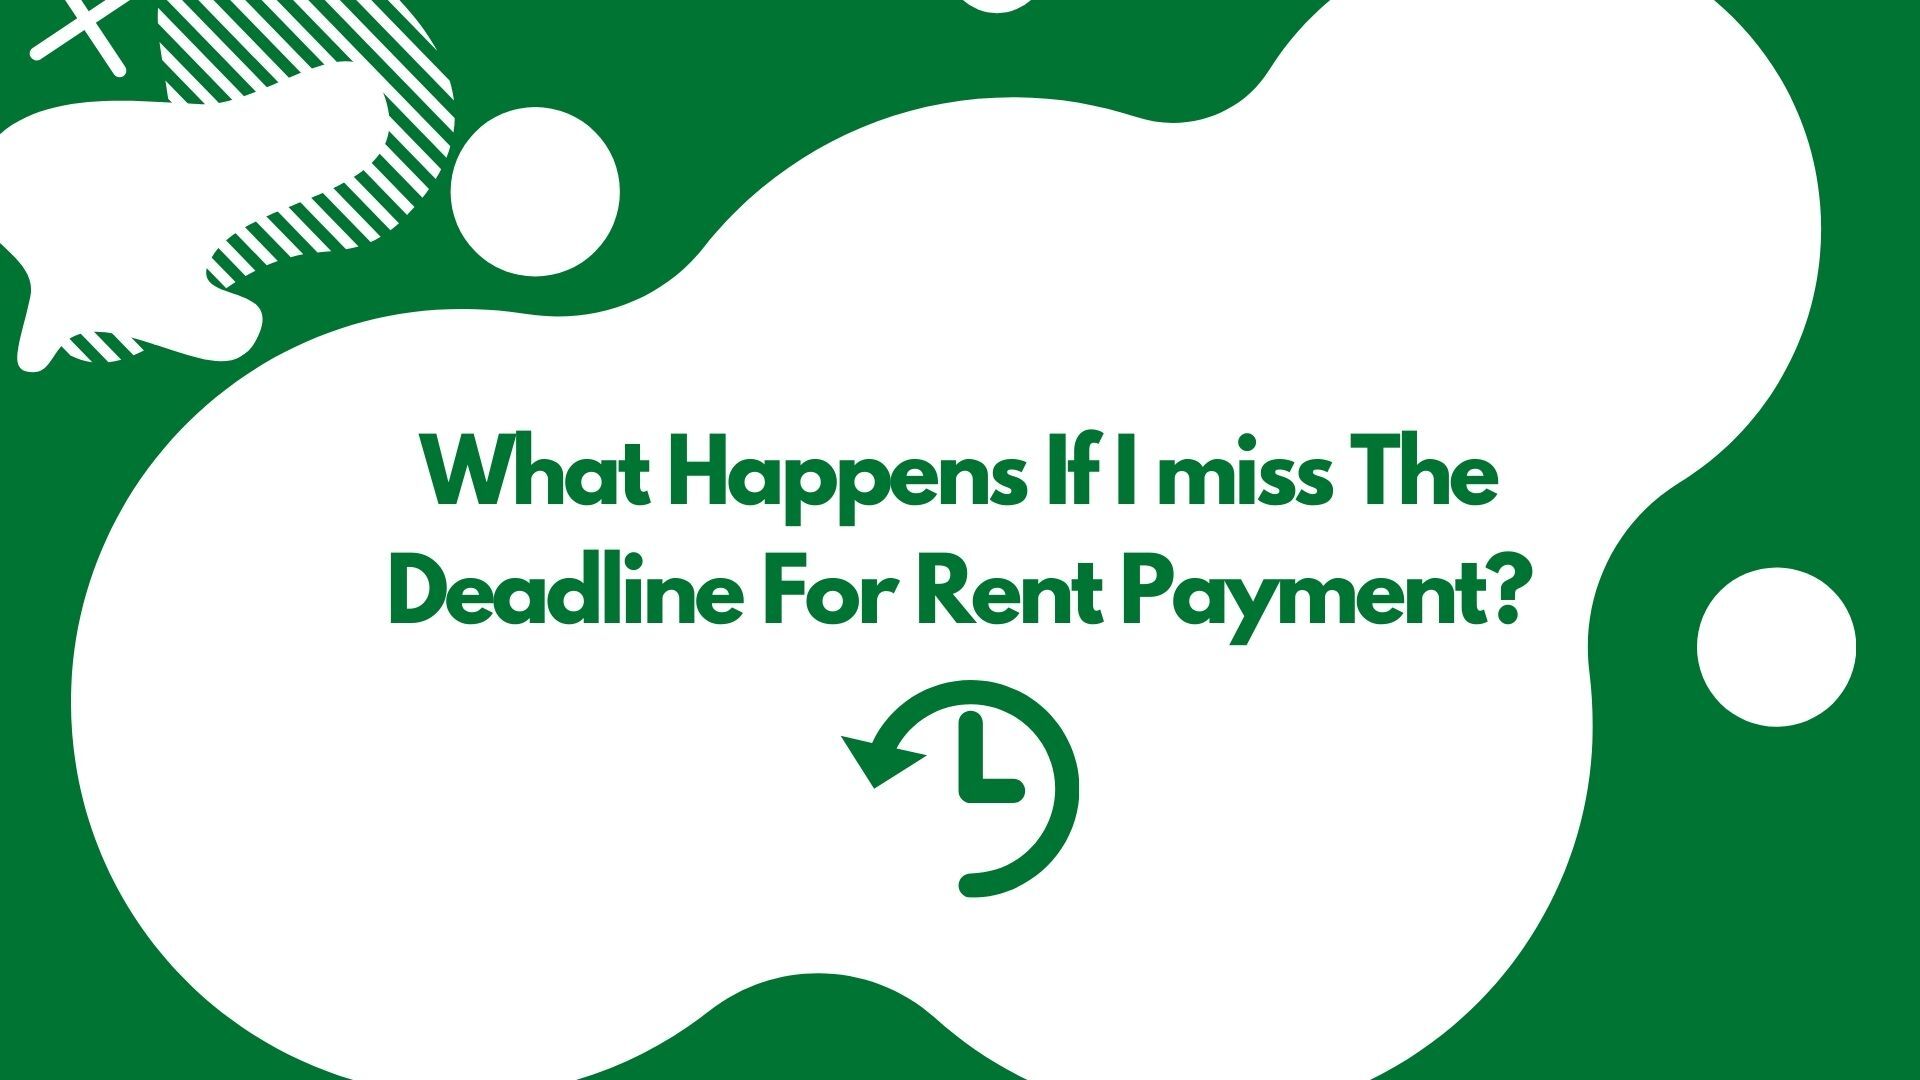 What happens if I miss a deadline for a rent payment